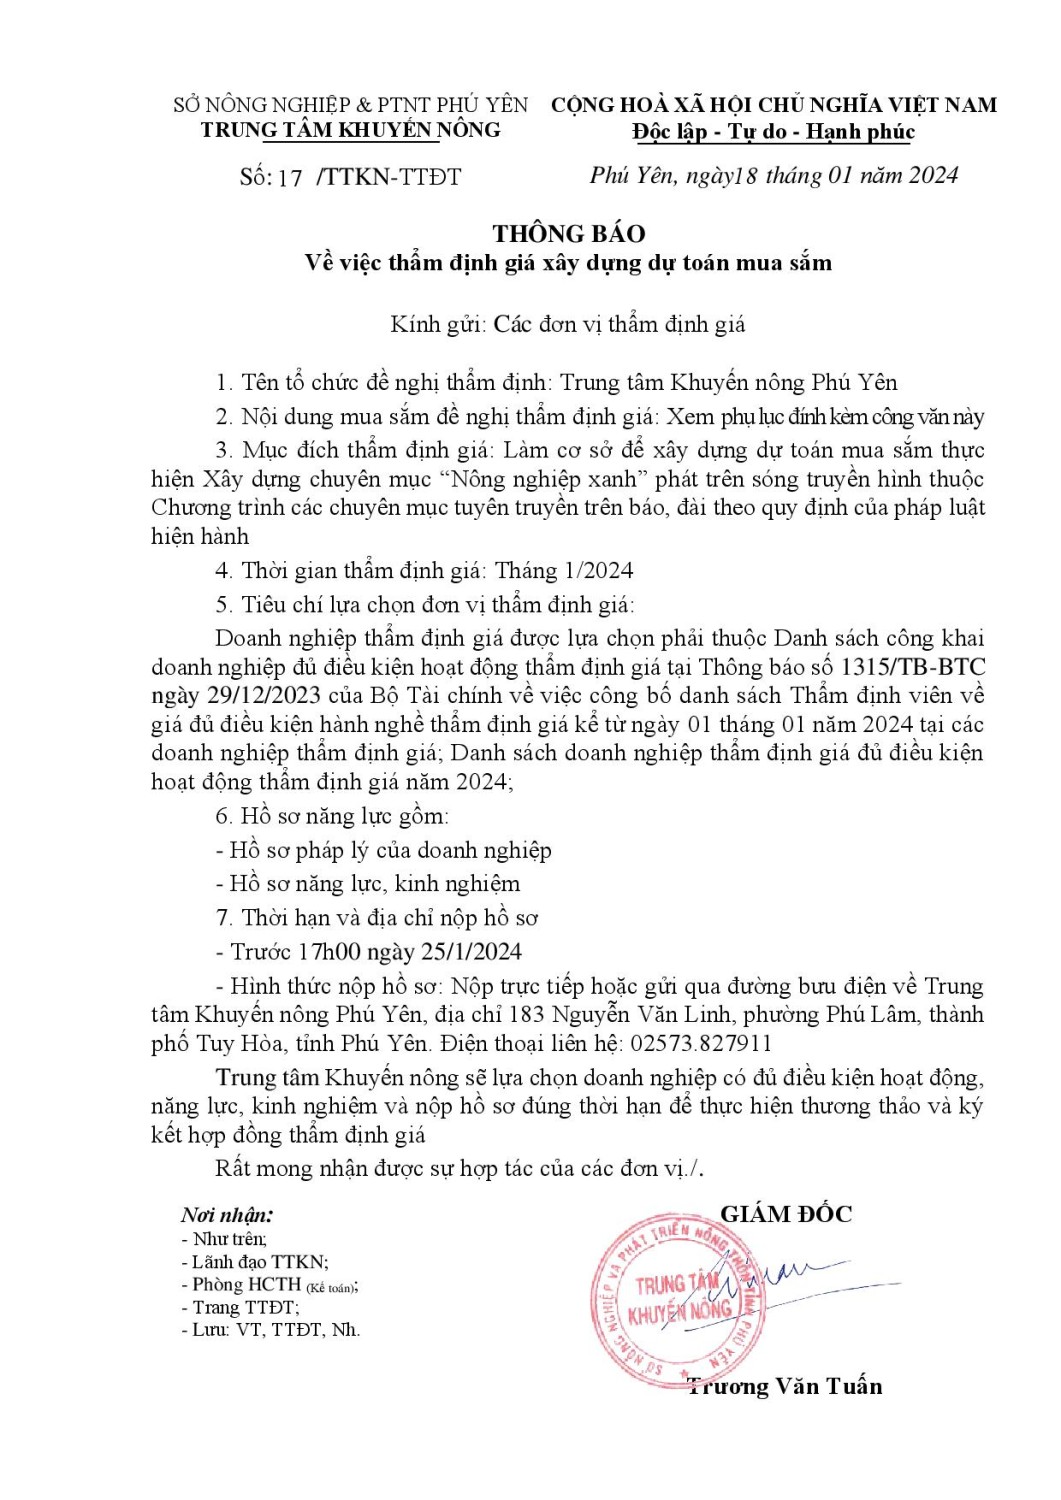 cong van de nghi tham dinh gia signed page 001